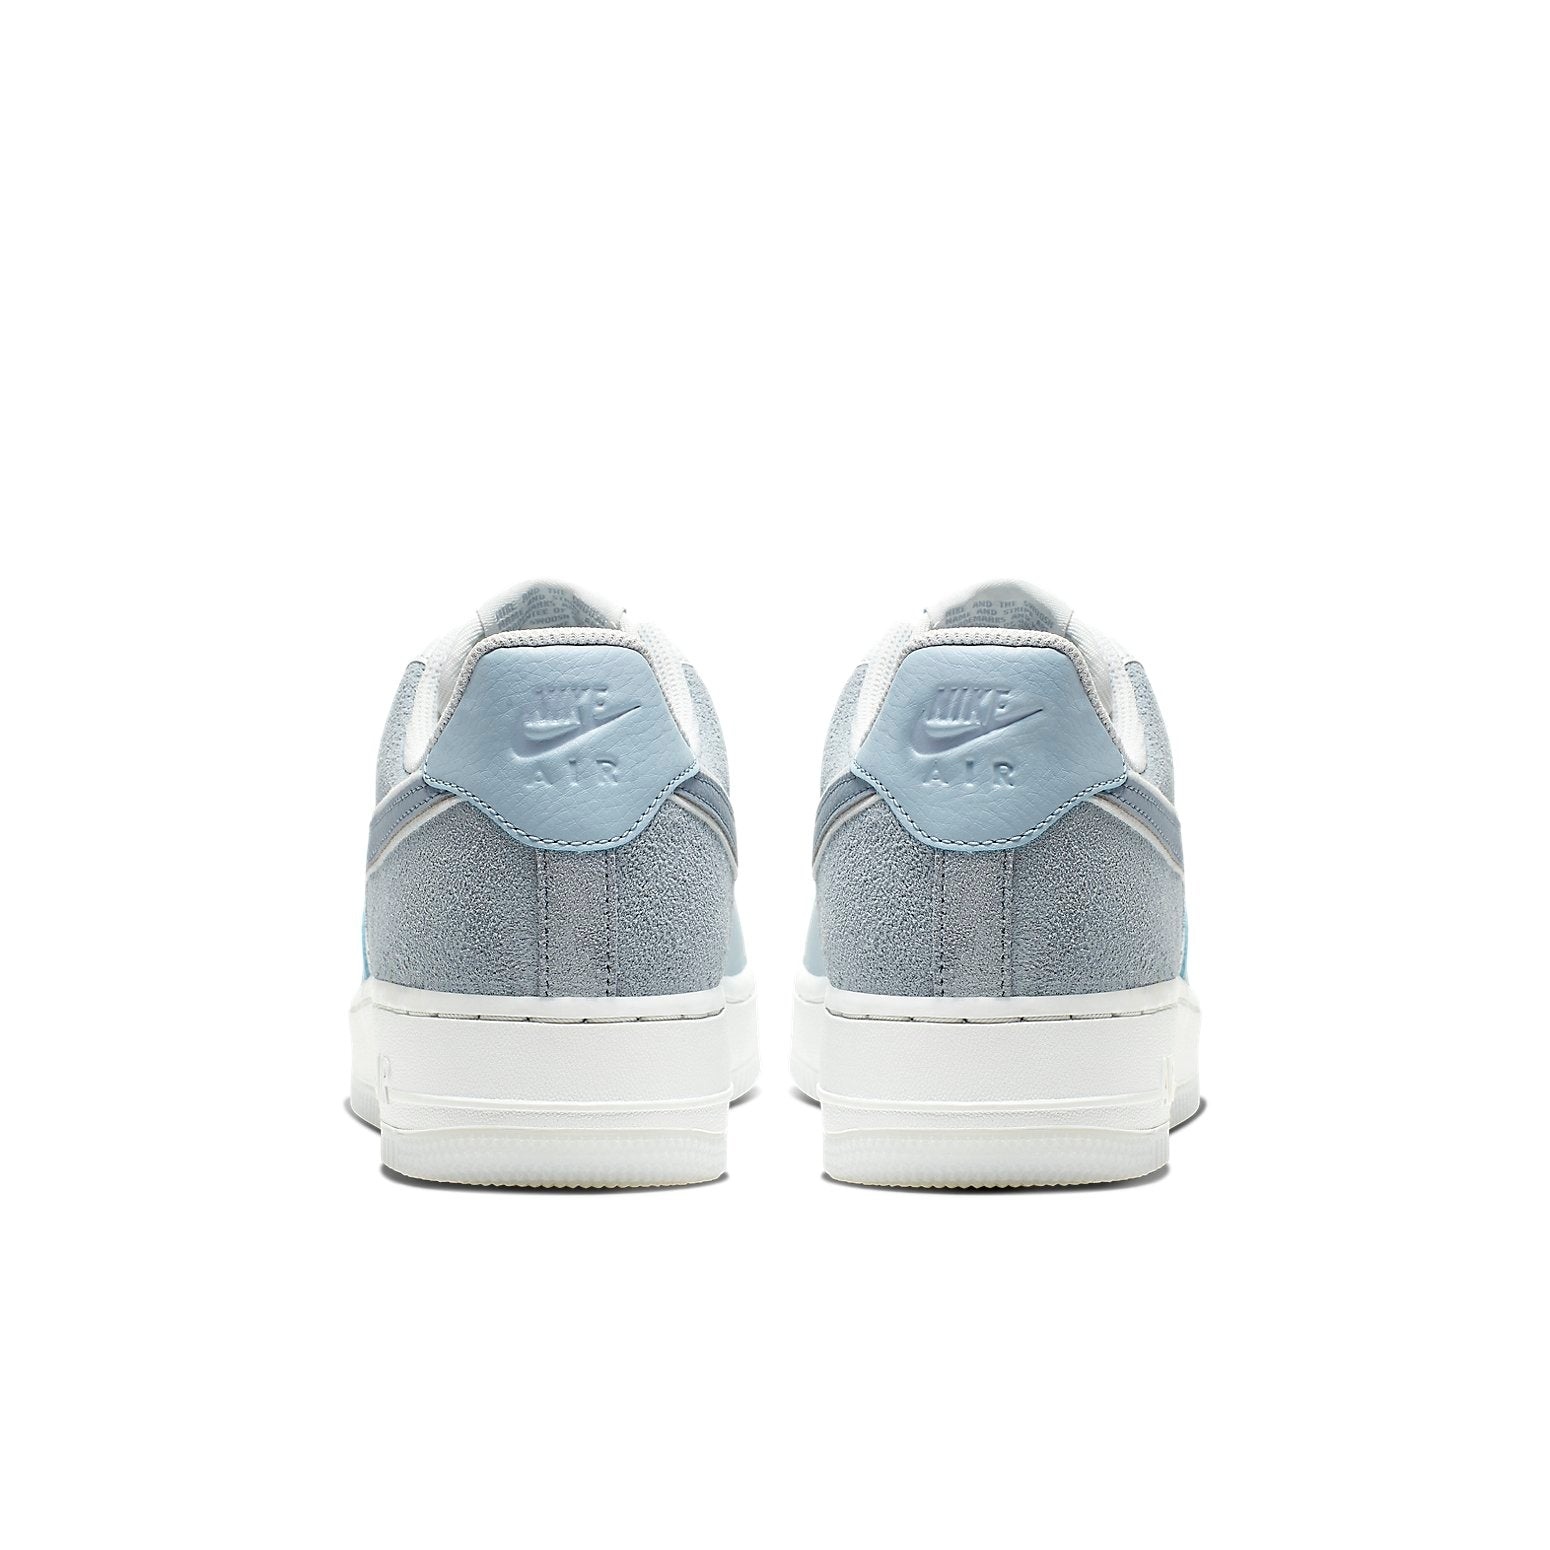 (WMNS) Nike Air Force 1 Low Premium 'Light Armory Blue' 896185-401 - 5